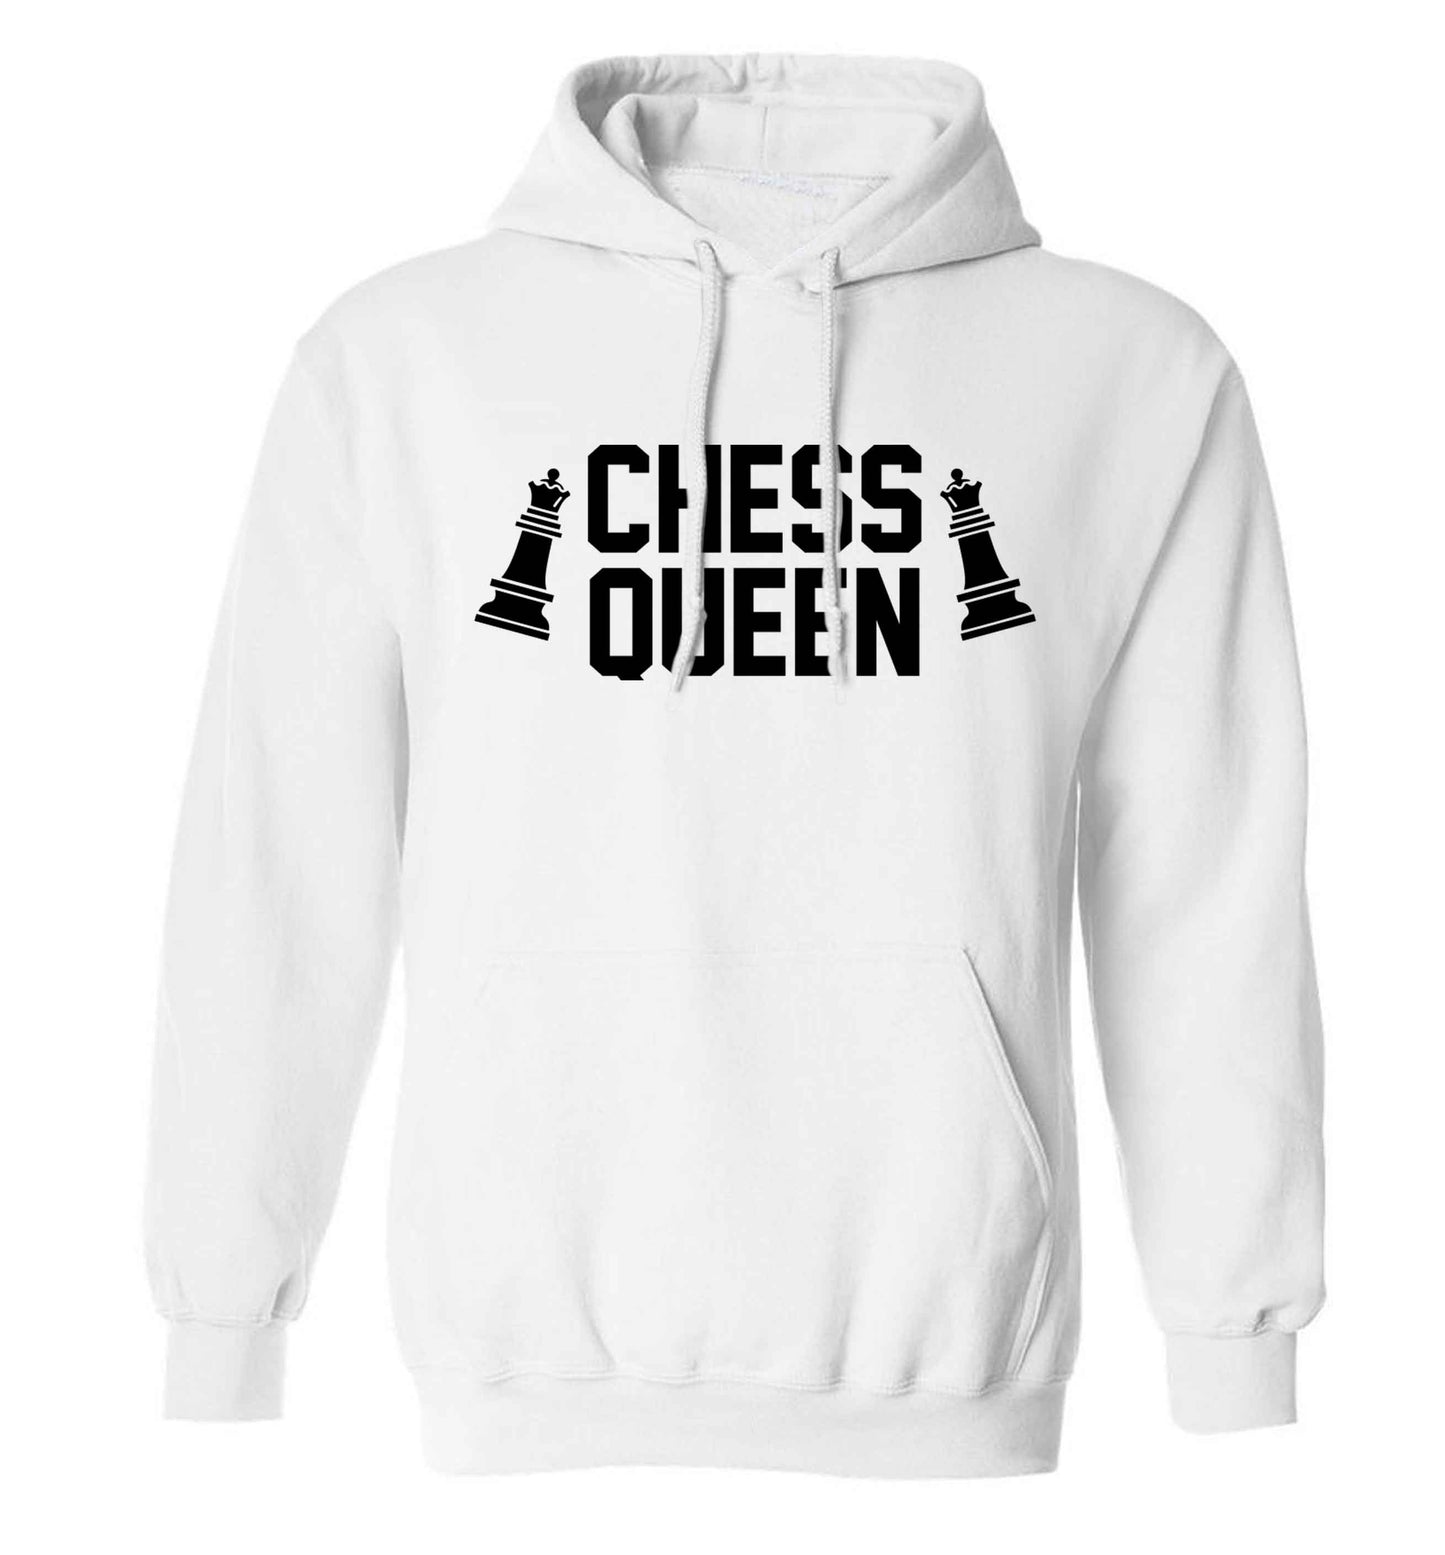 Chess queen adults unisex white hoodie 2XL